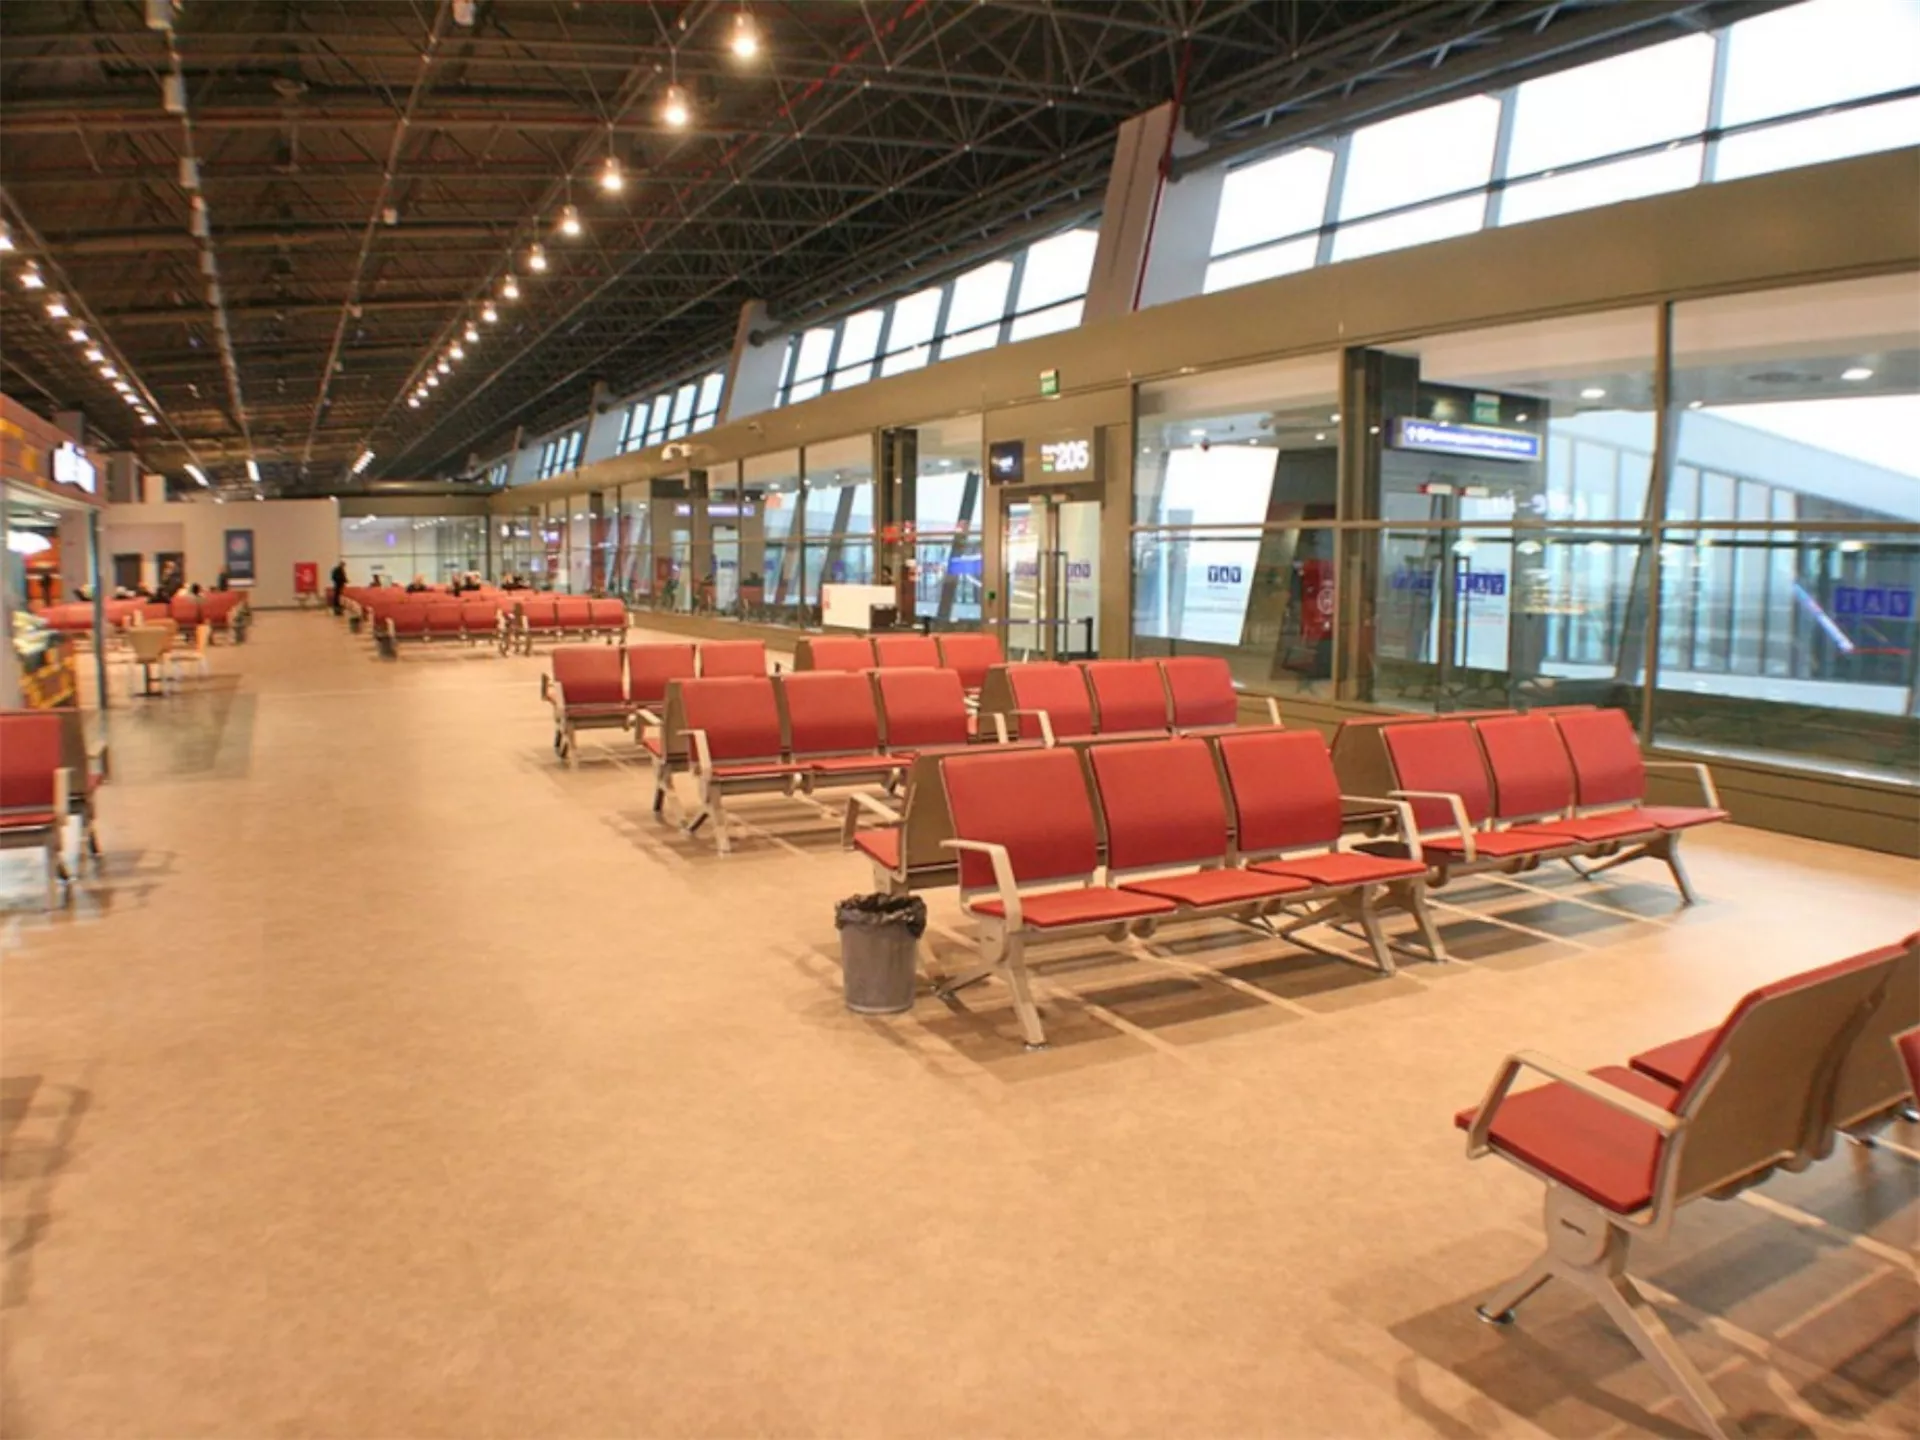 Alexander The Great Airport